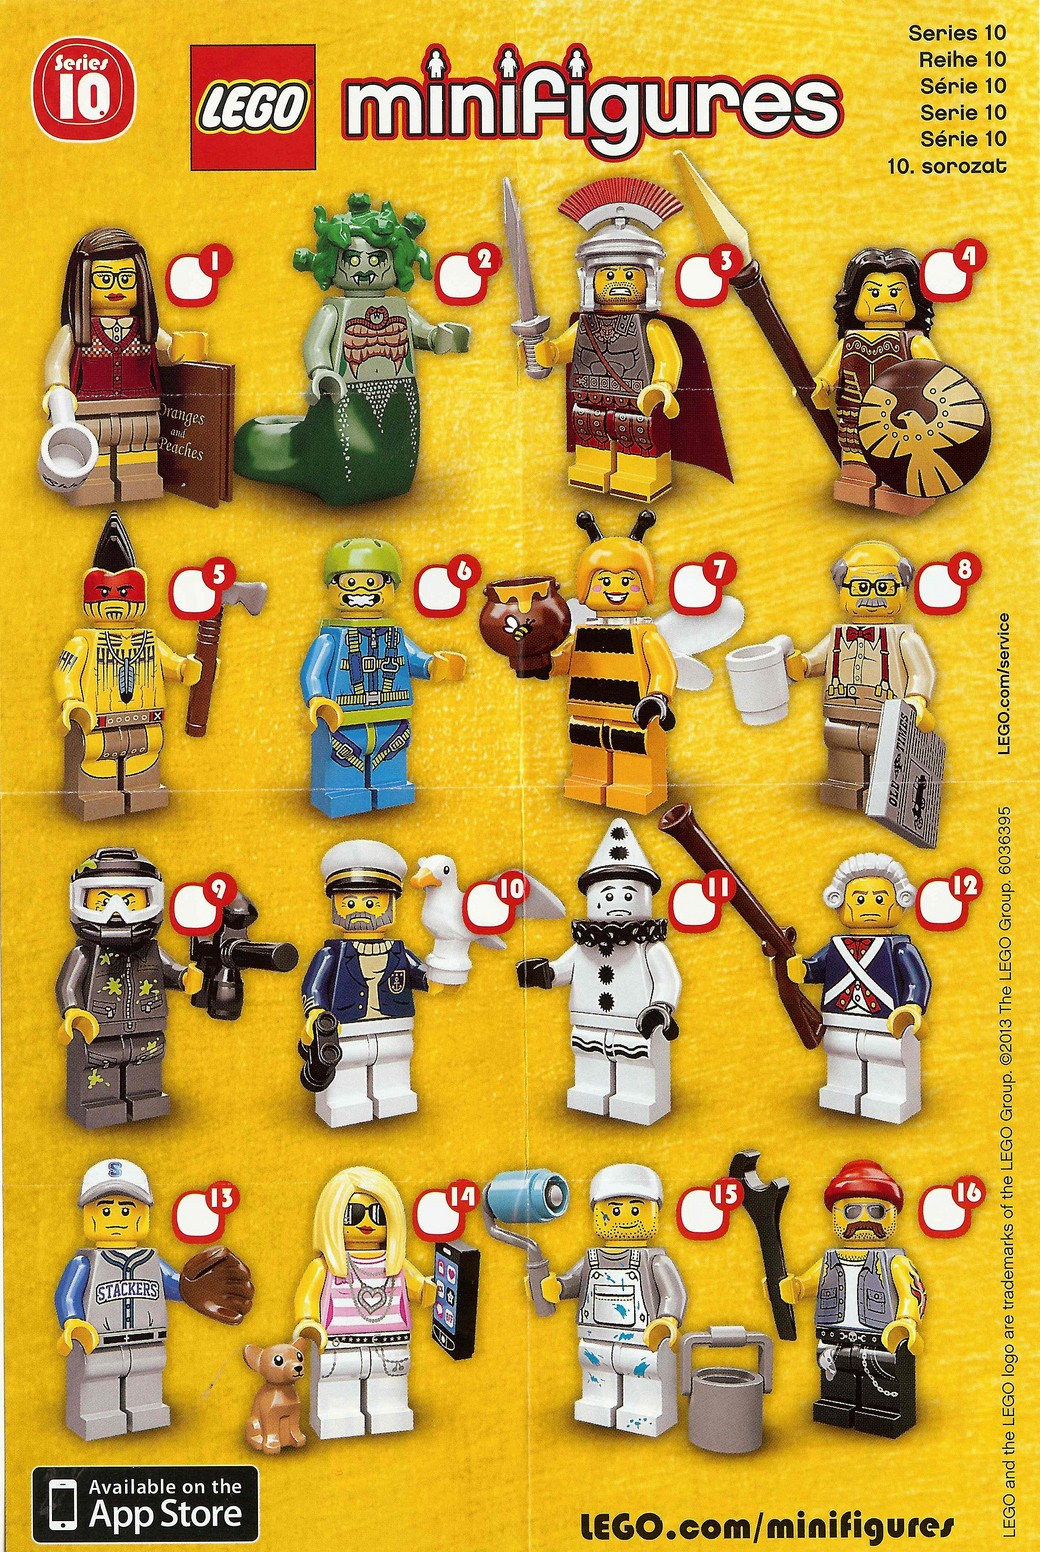 LEGO Minifigures Series 10 Gold Packaging and Inserts Revealed! - Bricks and Bloks